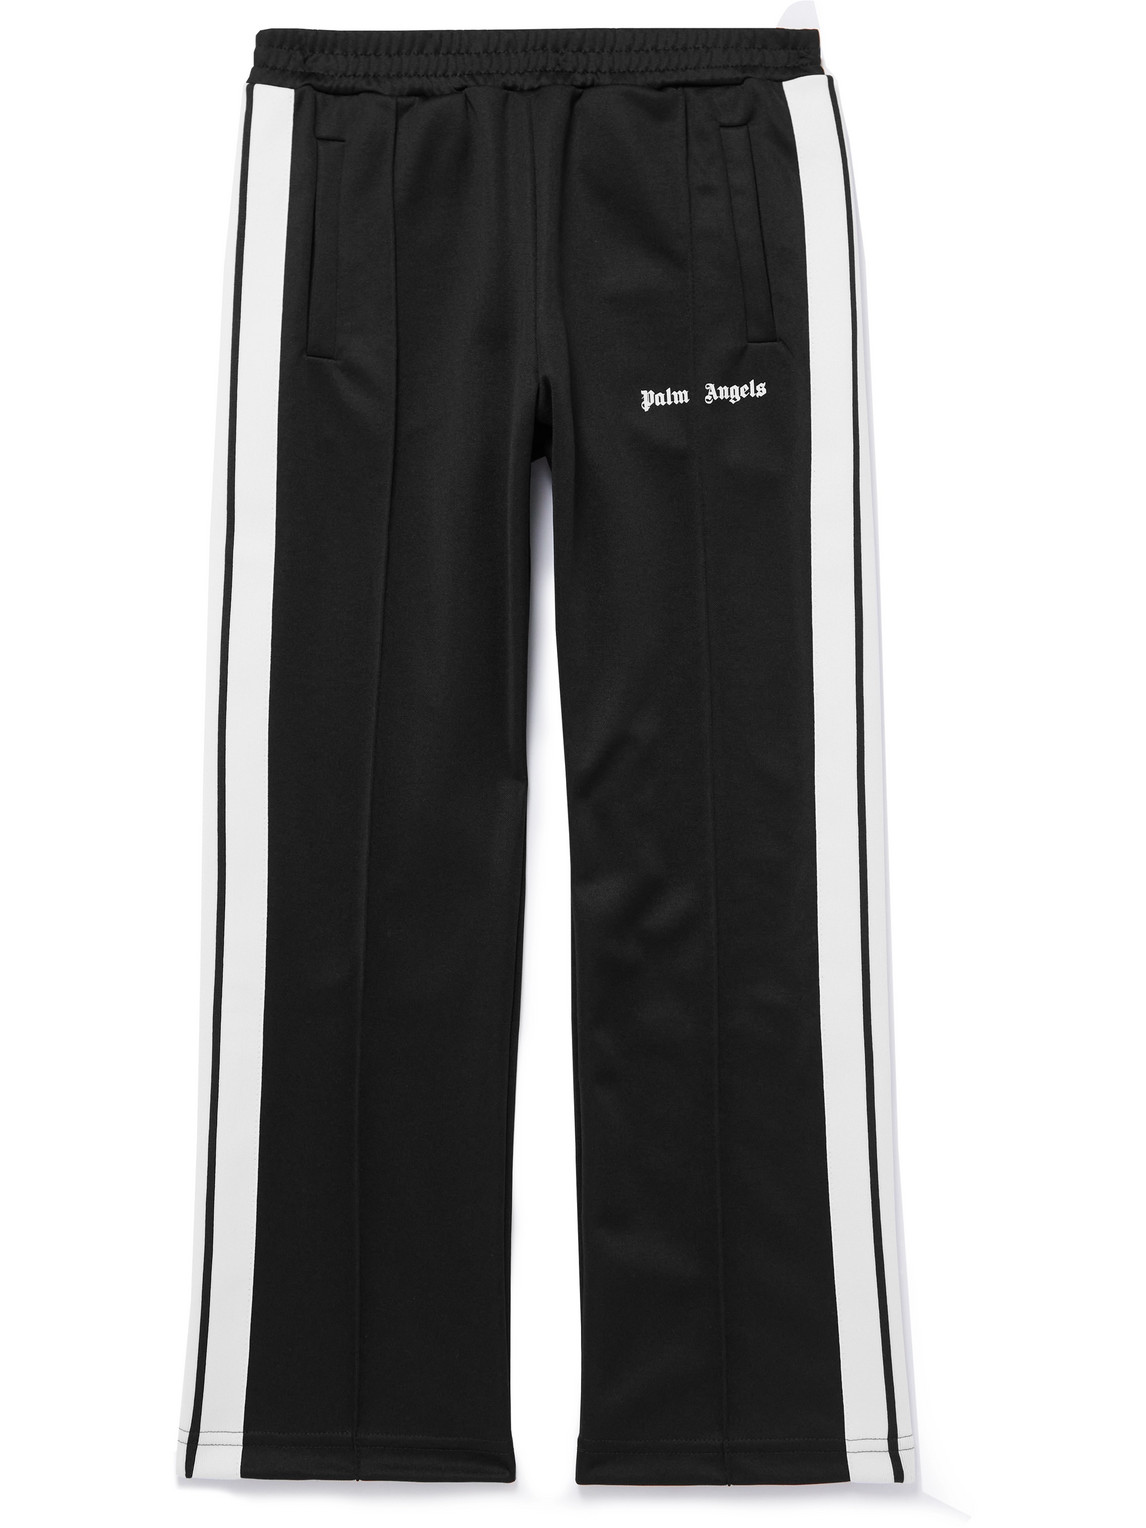 PALM ANGELS LOGO-PRINT STRIPED JERSEY TRACK trousers